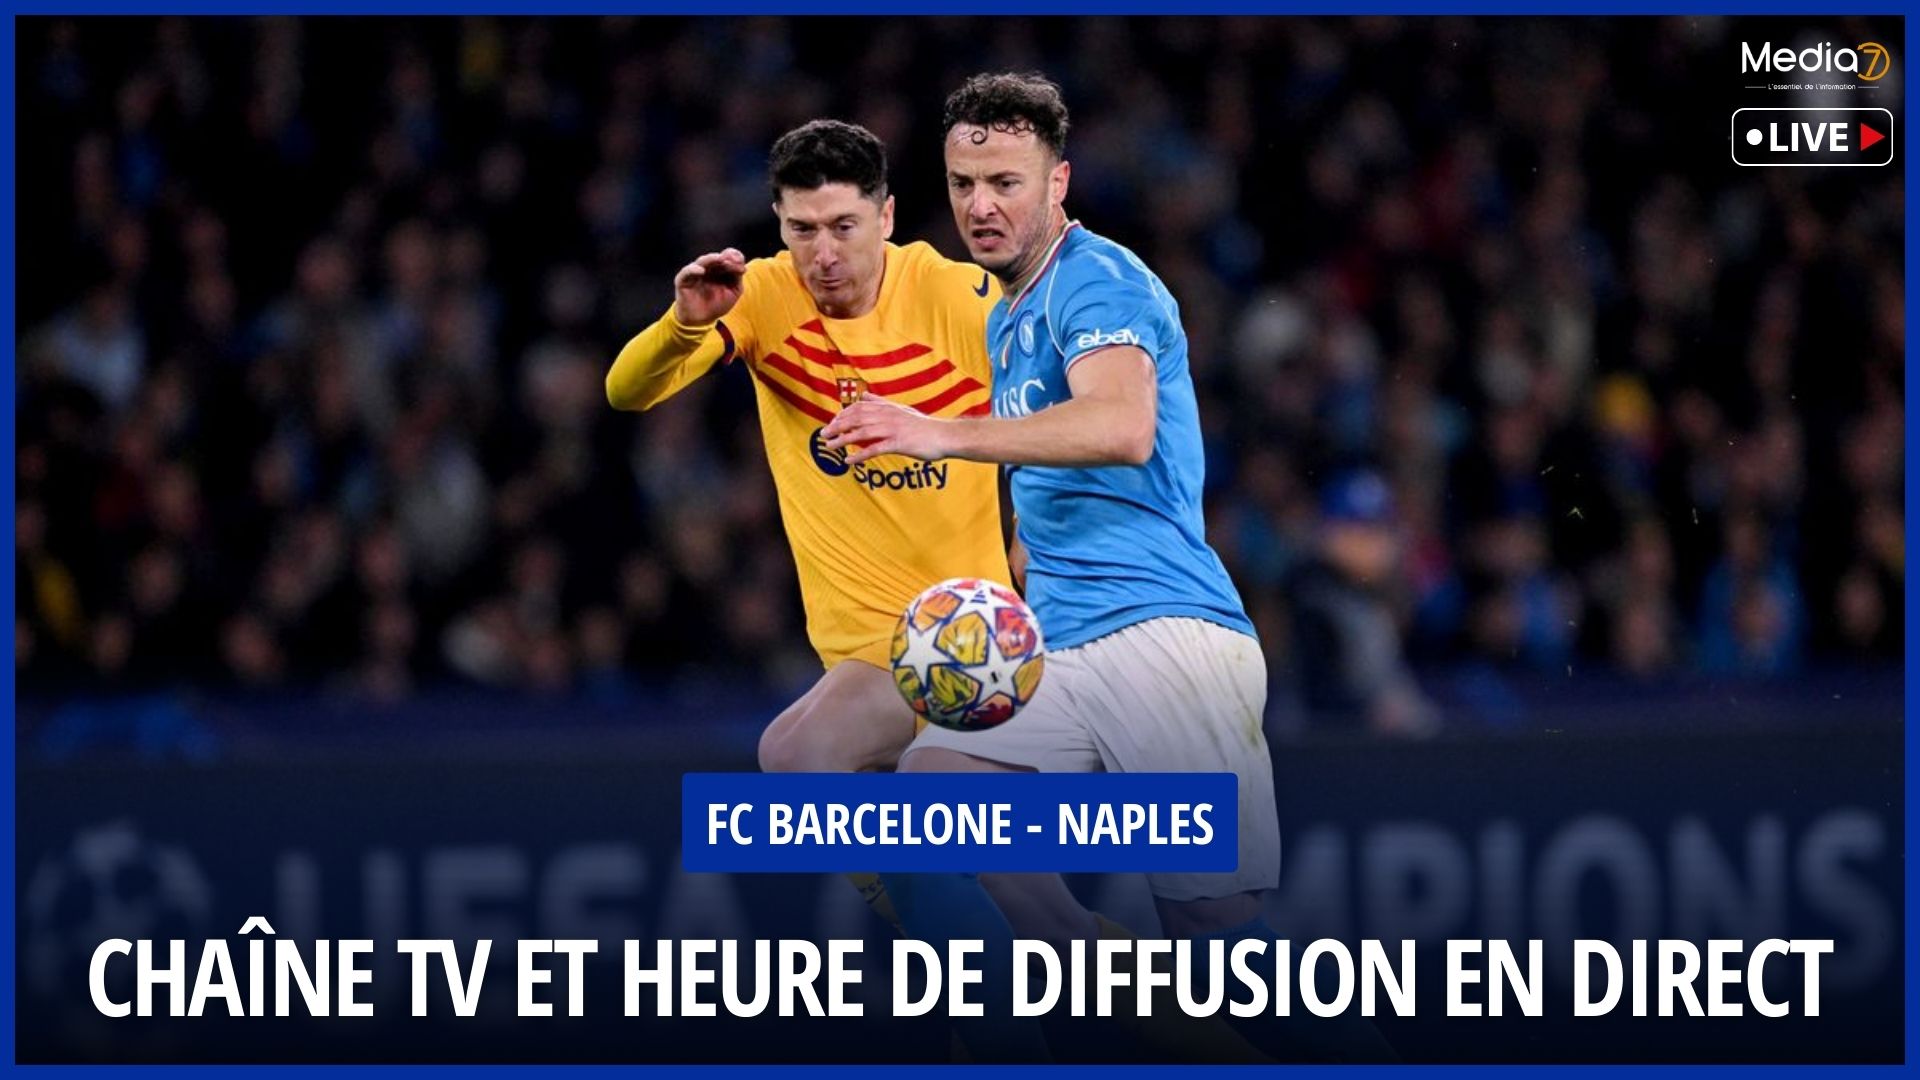 FC Barcelona - Naples Match Live: Where to Watch on TV & Streaming? Time and Channel! - Media7